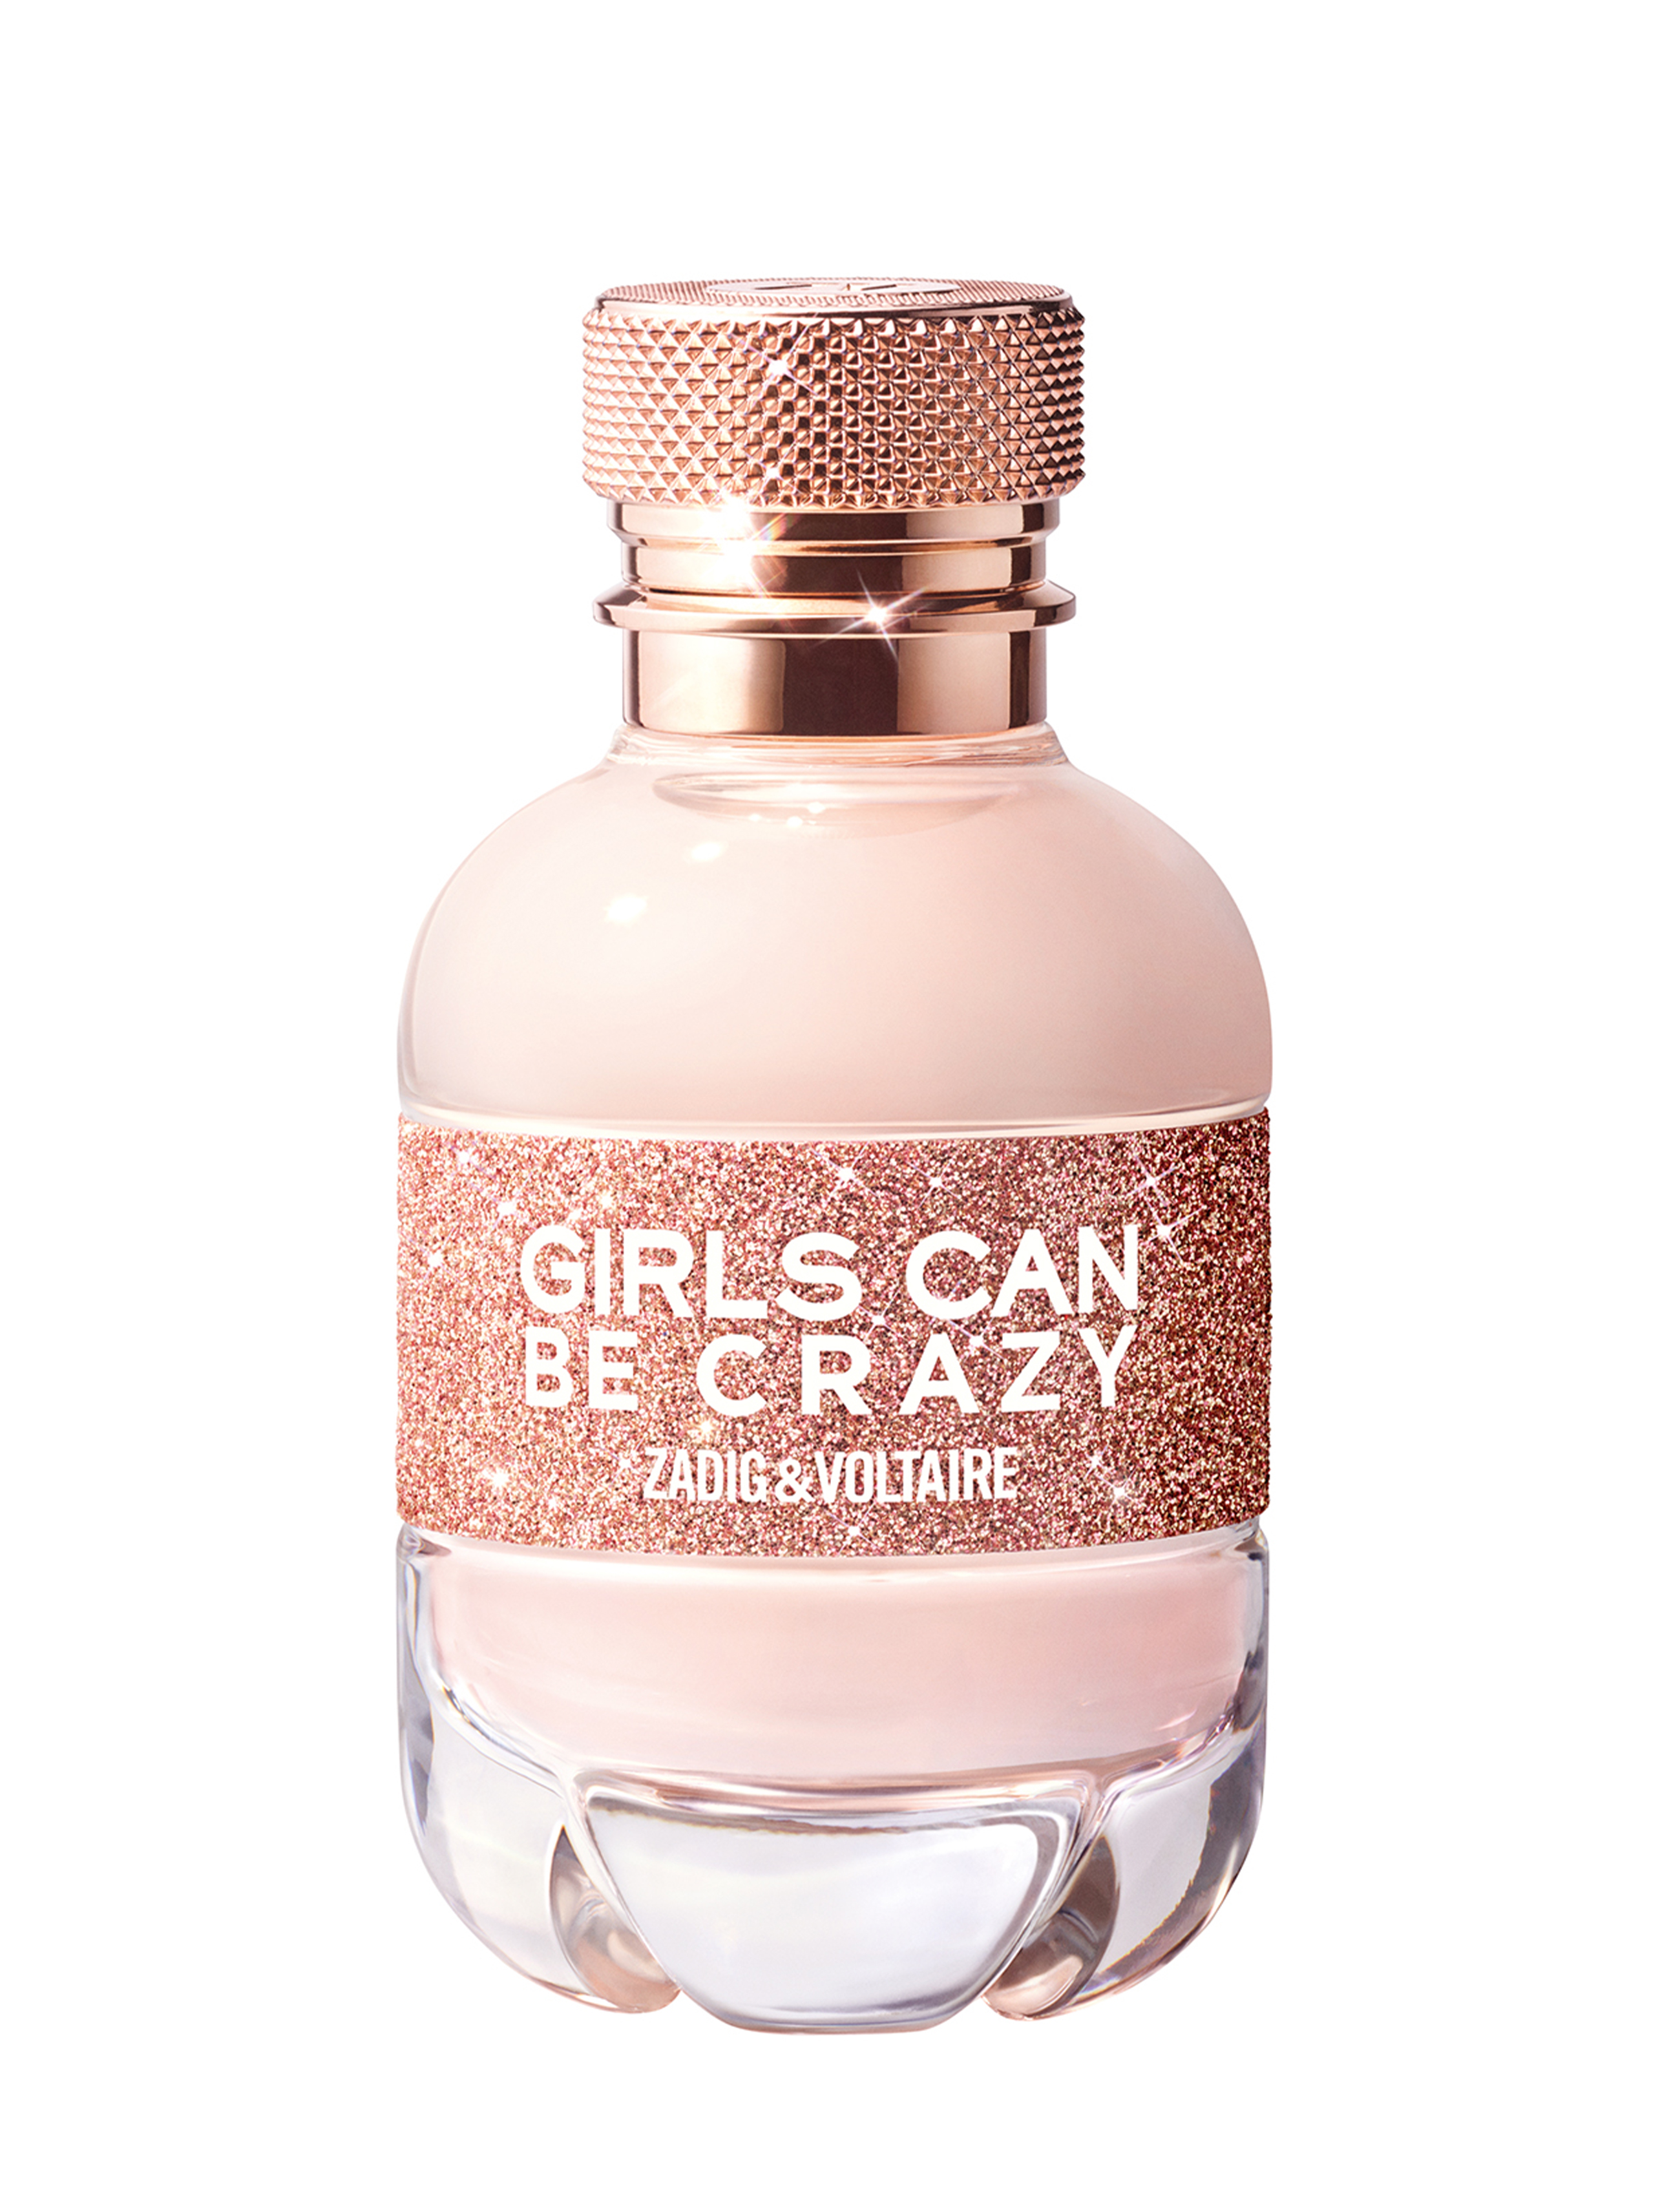 Zadig & Voltaire - Girls Can Be Crazy EDP 50 ml